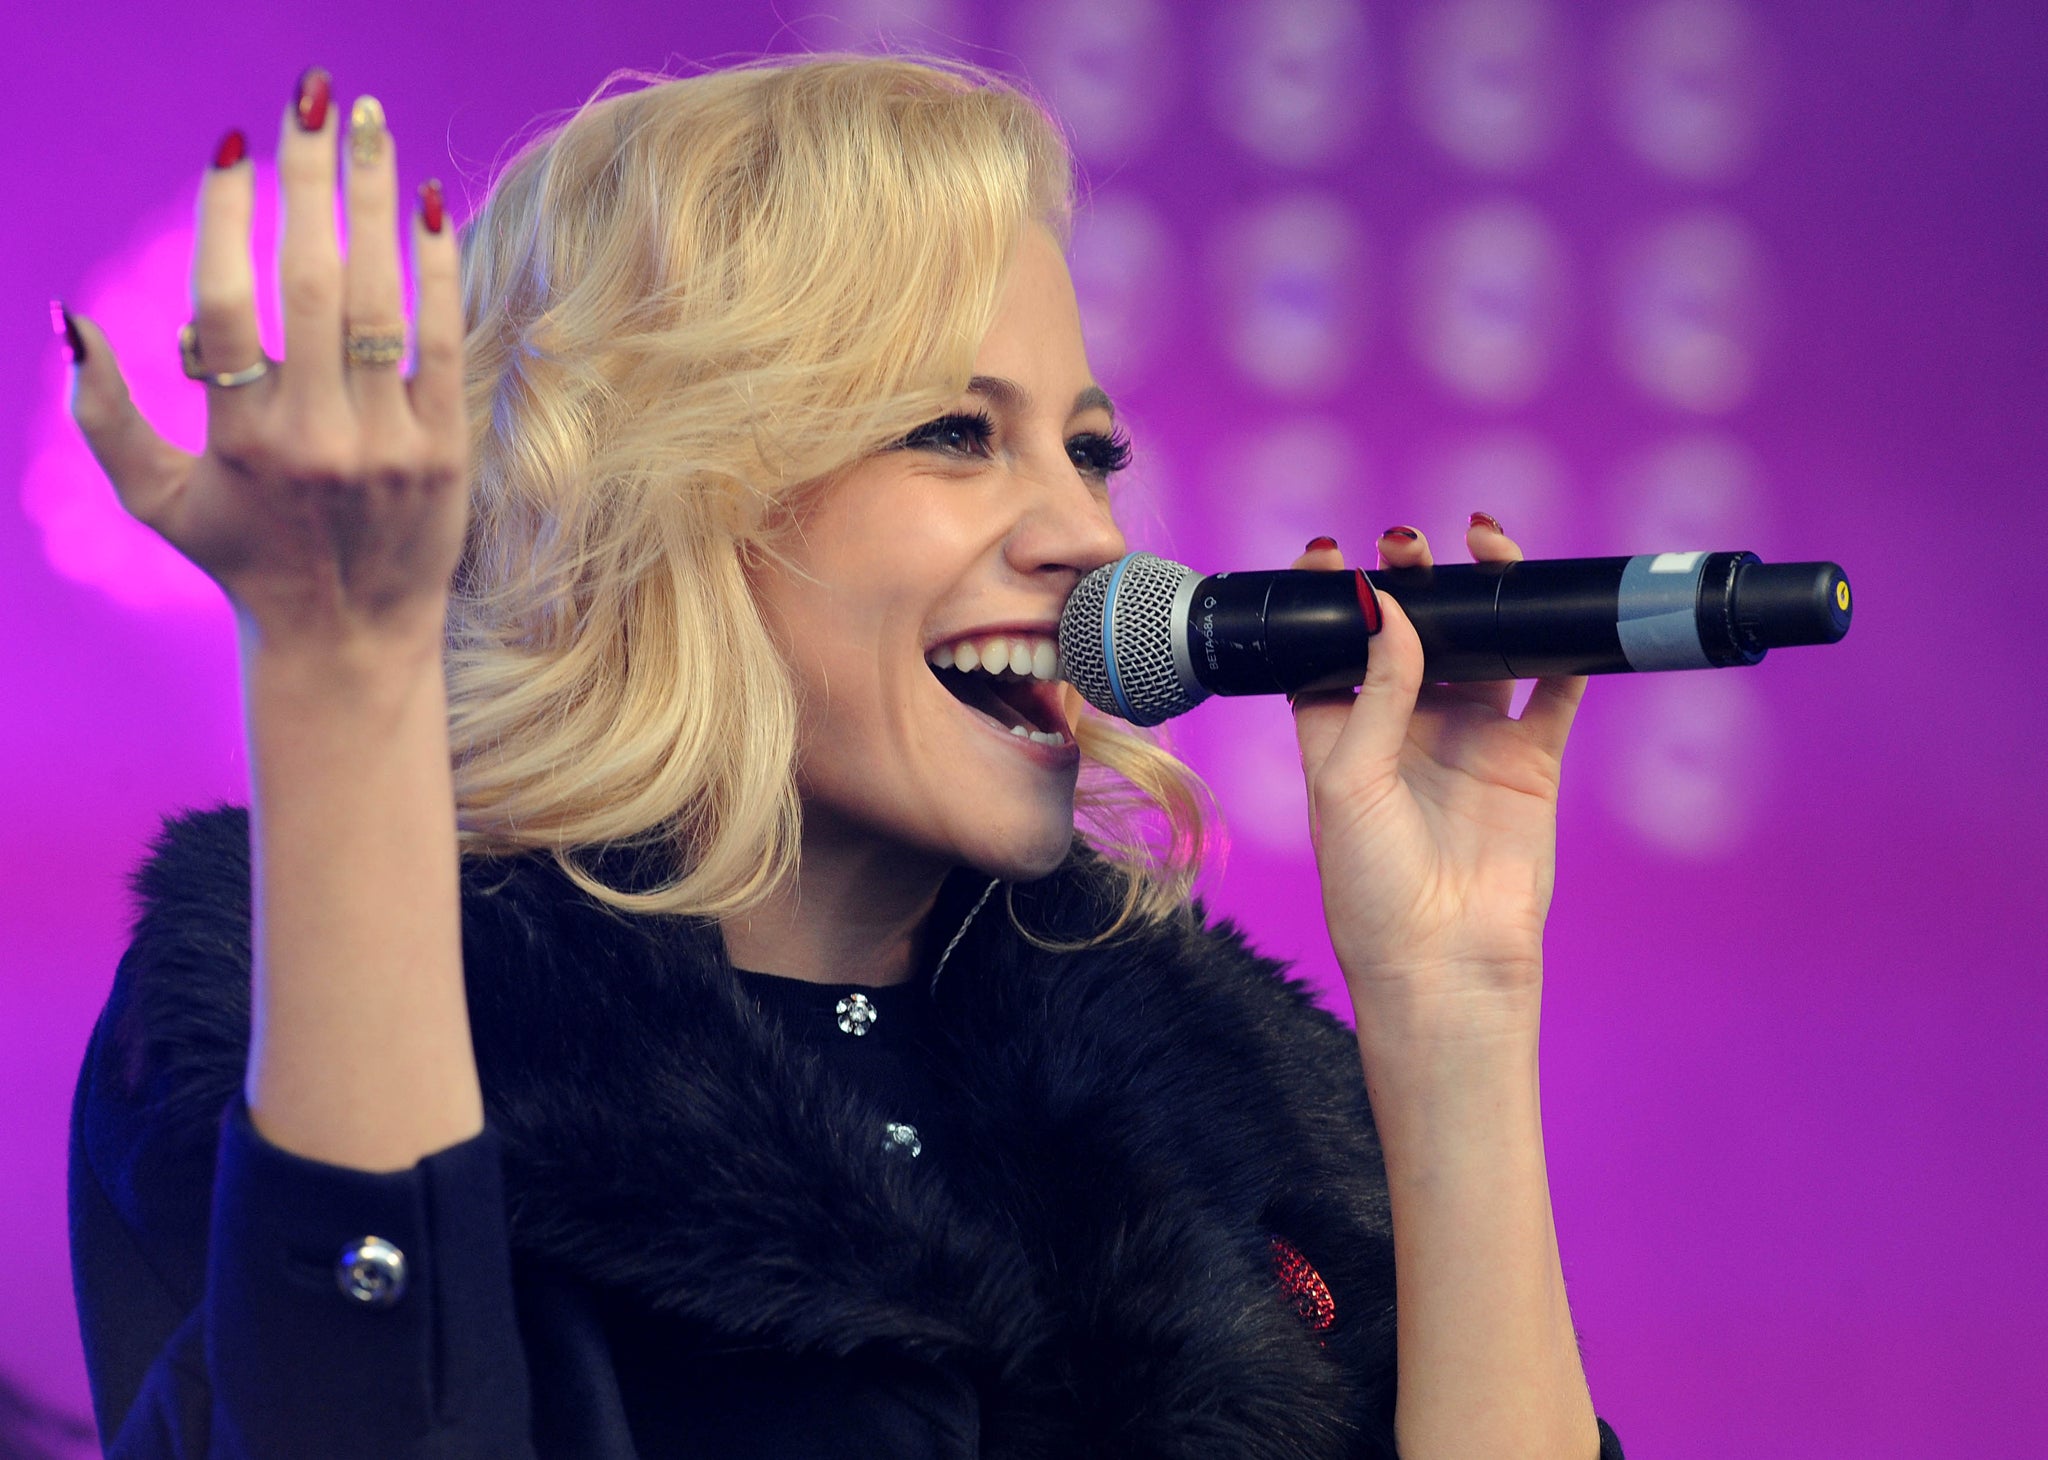 Singer Pixie Lott will take part in Strictly Come Dancing 2014, the BBC has confirmed